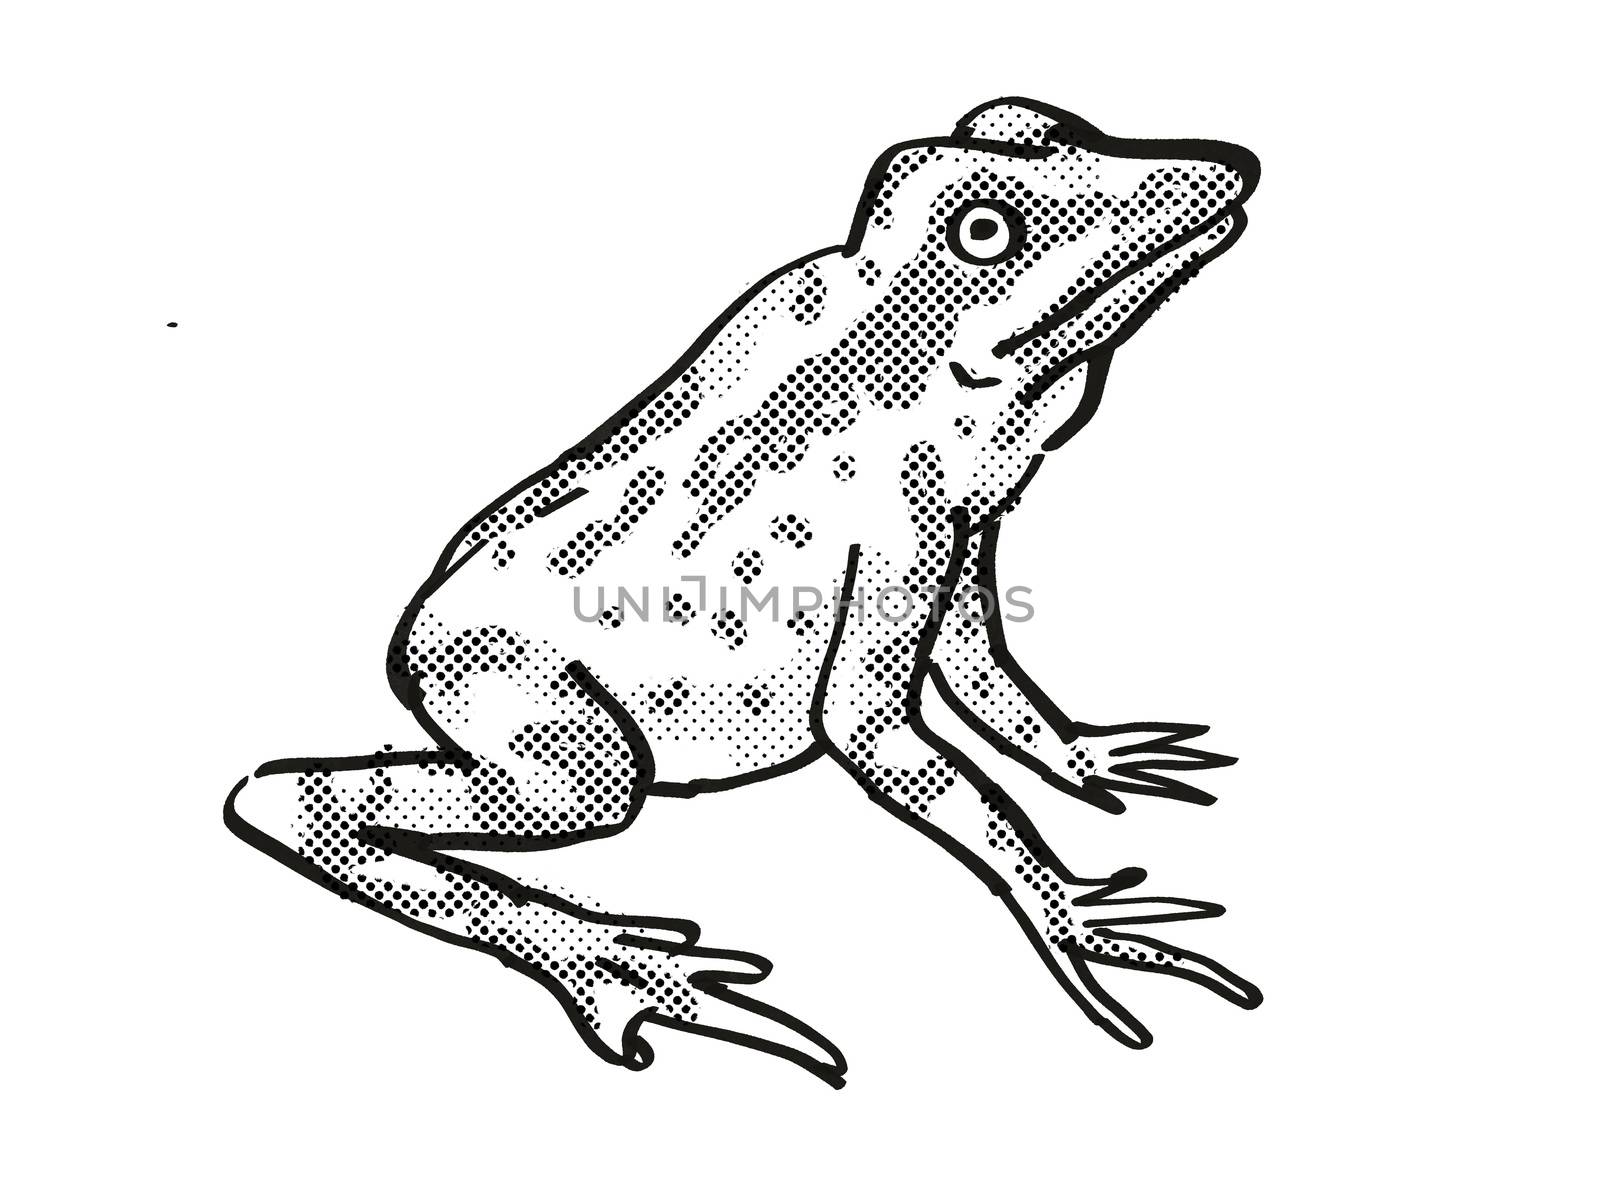 Retro cartoon line drawing style drawing of a Andersson's Stubfoot Toad, an endangered wildlife species on isolated background done in black and white full body.